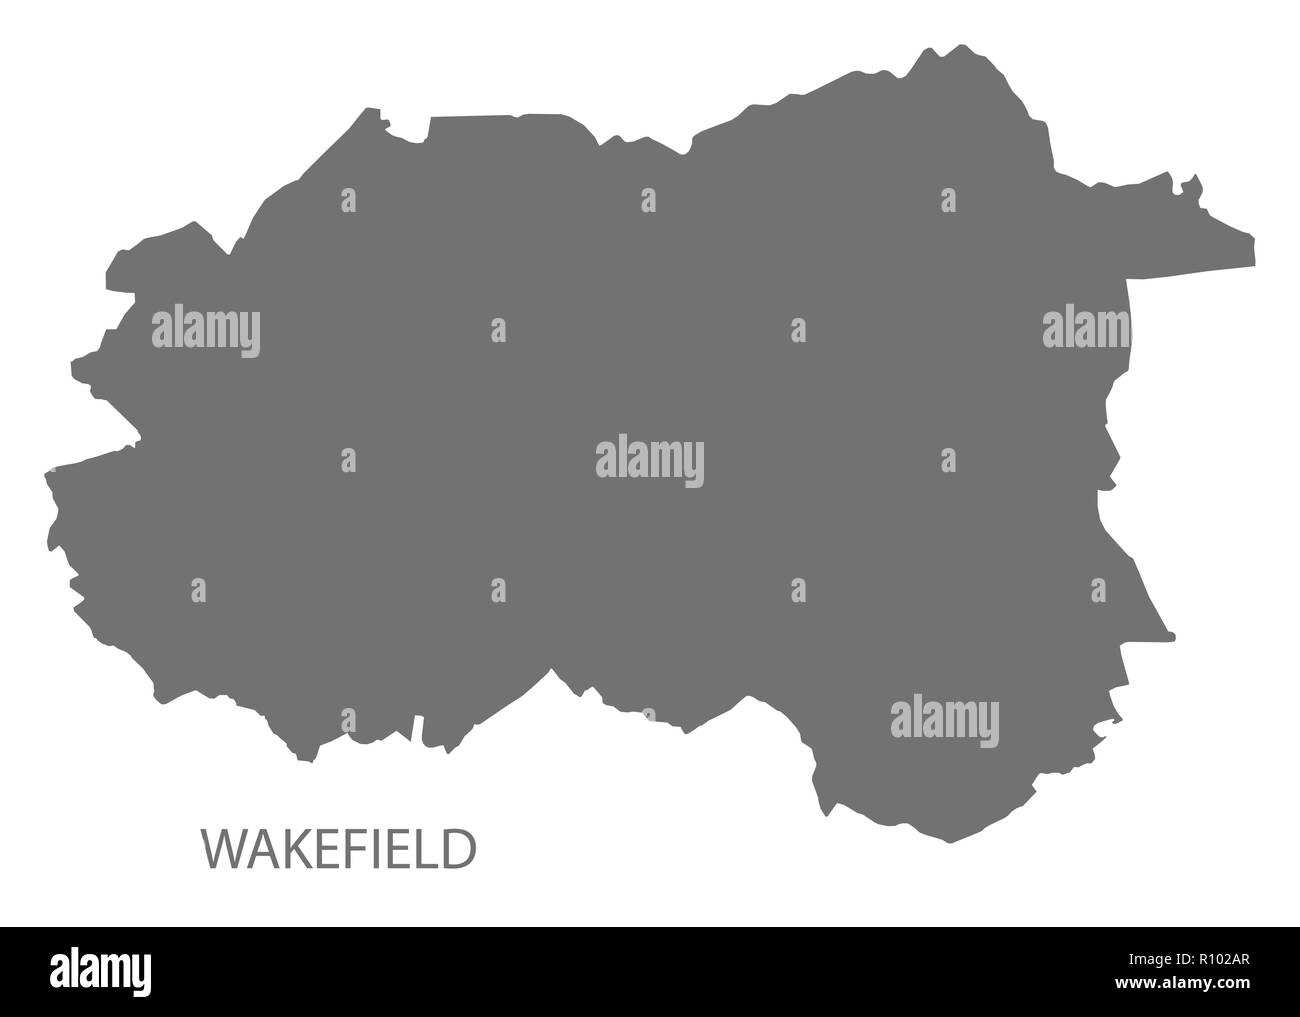 Wakefield city map grey illustration silhouette shape Stock Vector